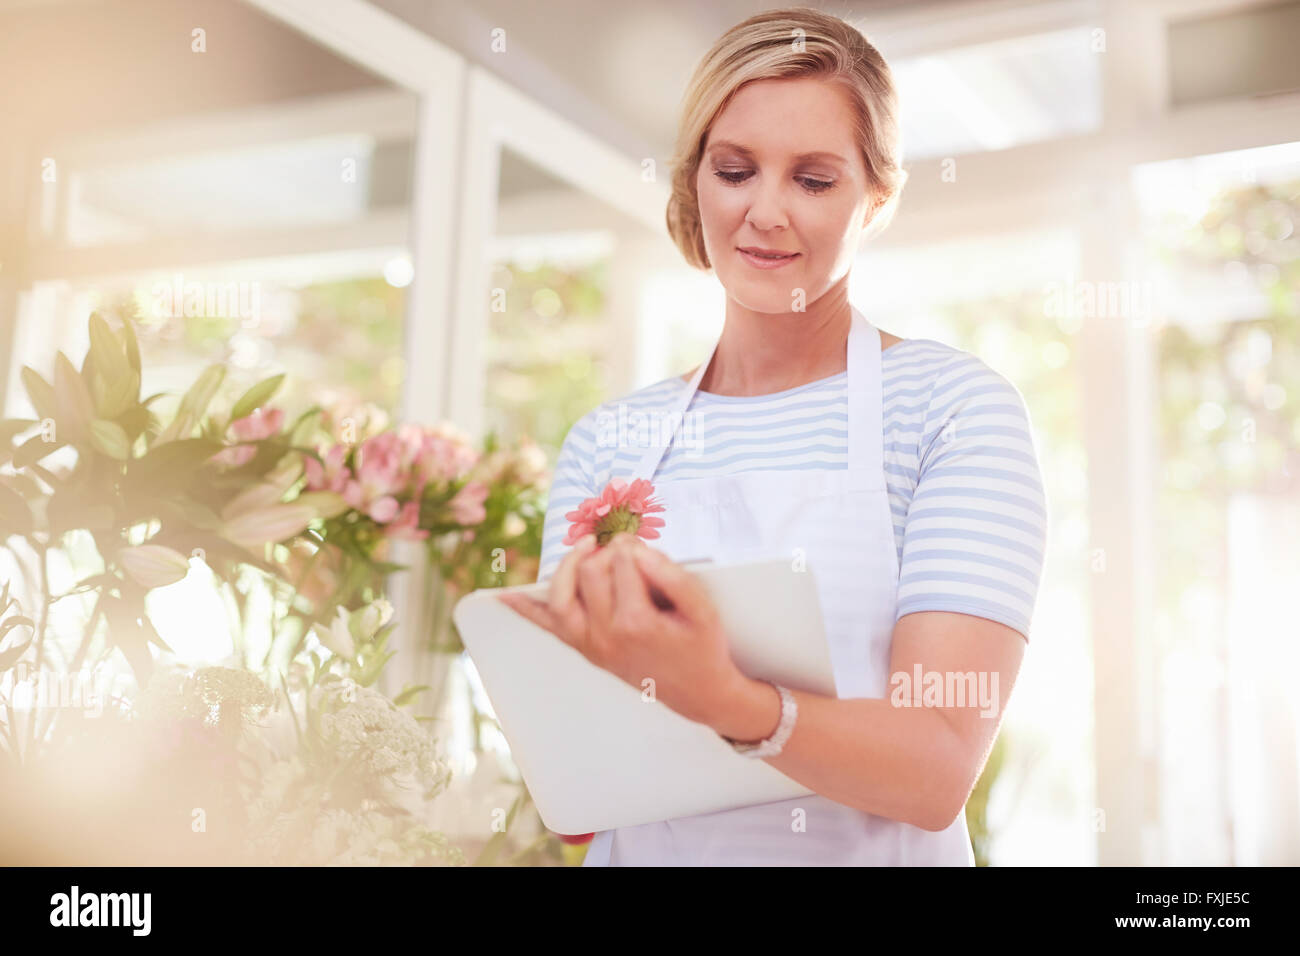 Florist with clipboard in flower shop Stock Photo